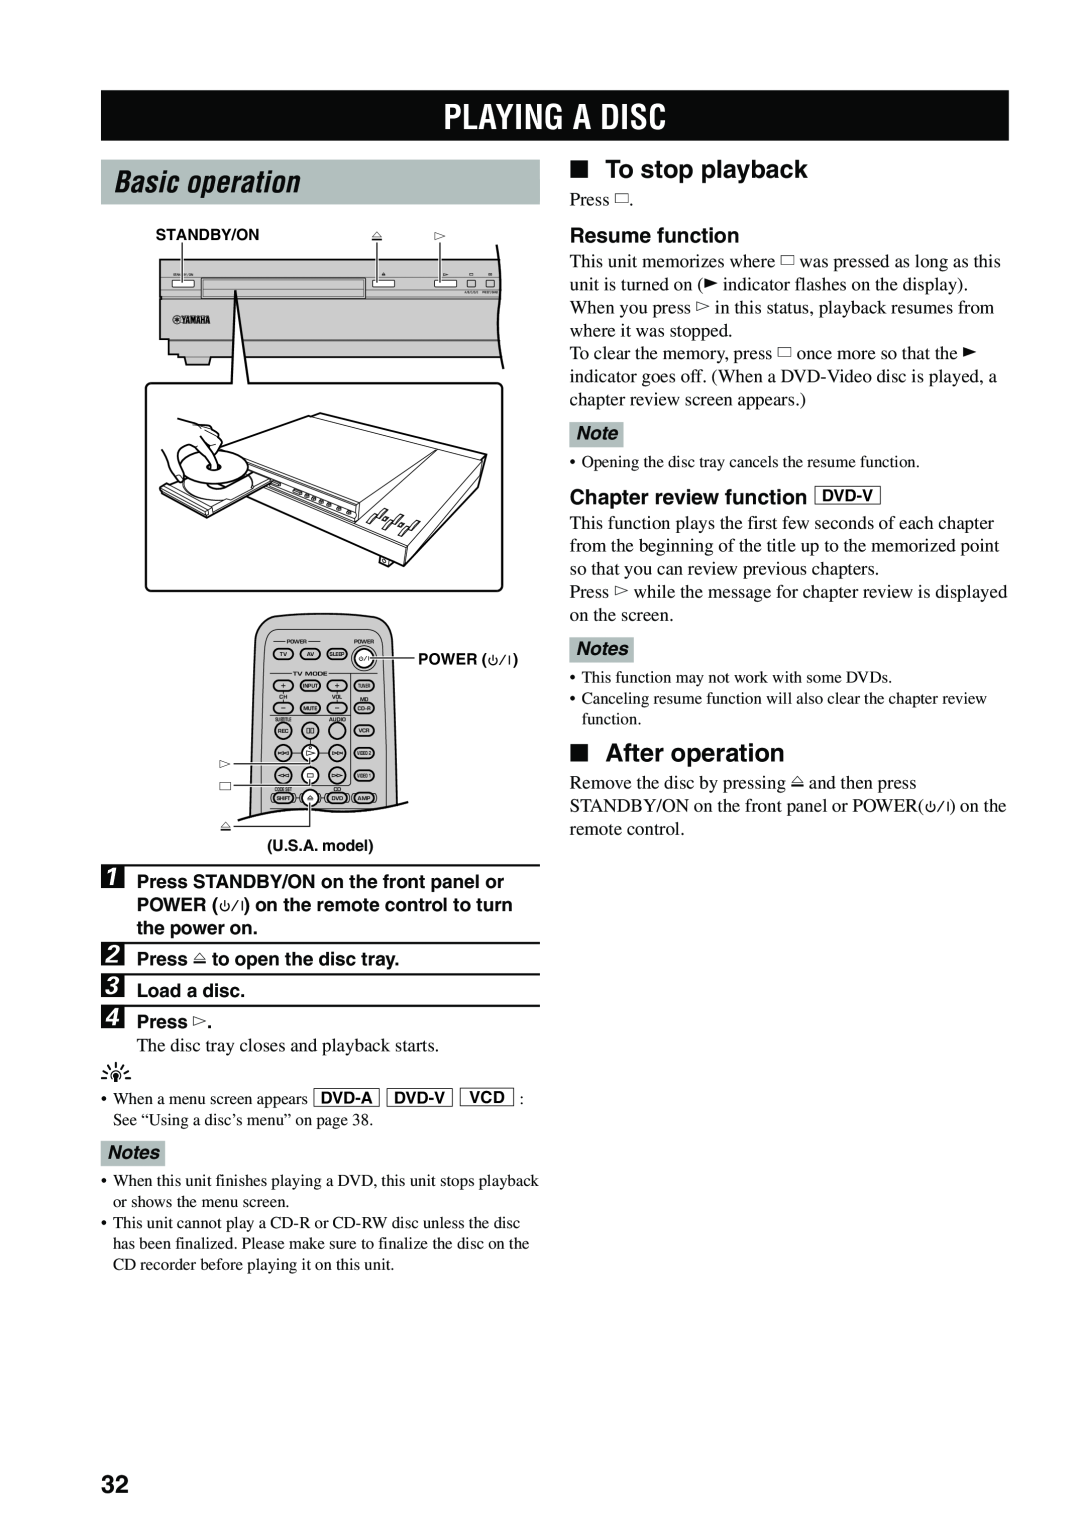 Yamaha DVX-S100 owner manual Playing A Disc, Basic operation, To stop playback, After operation, Resume function, 4Press w 